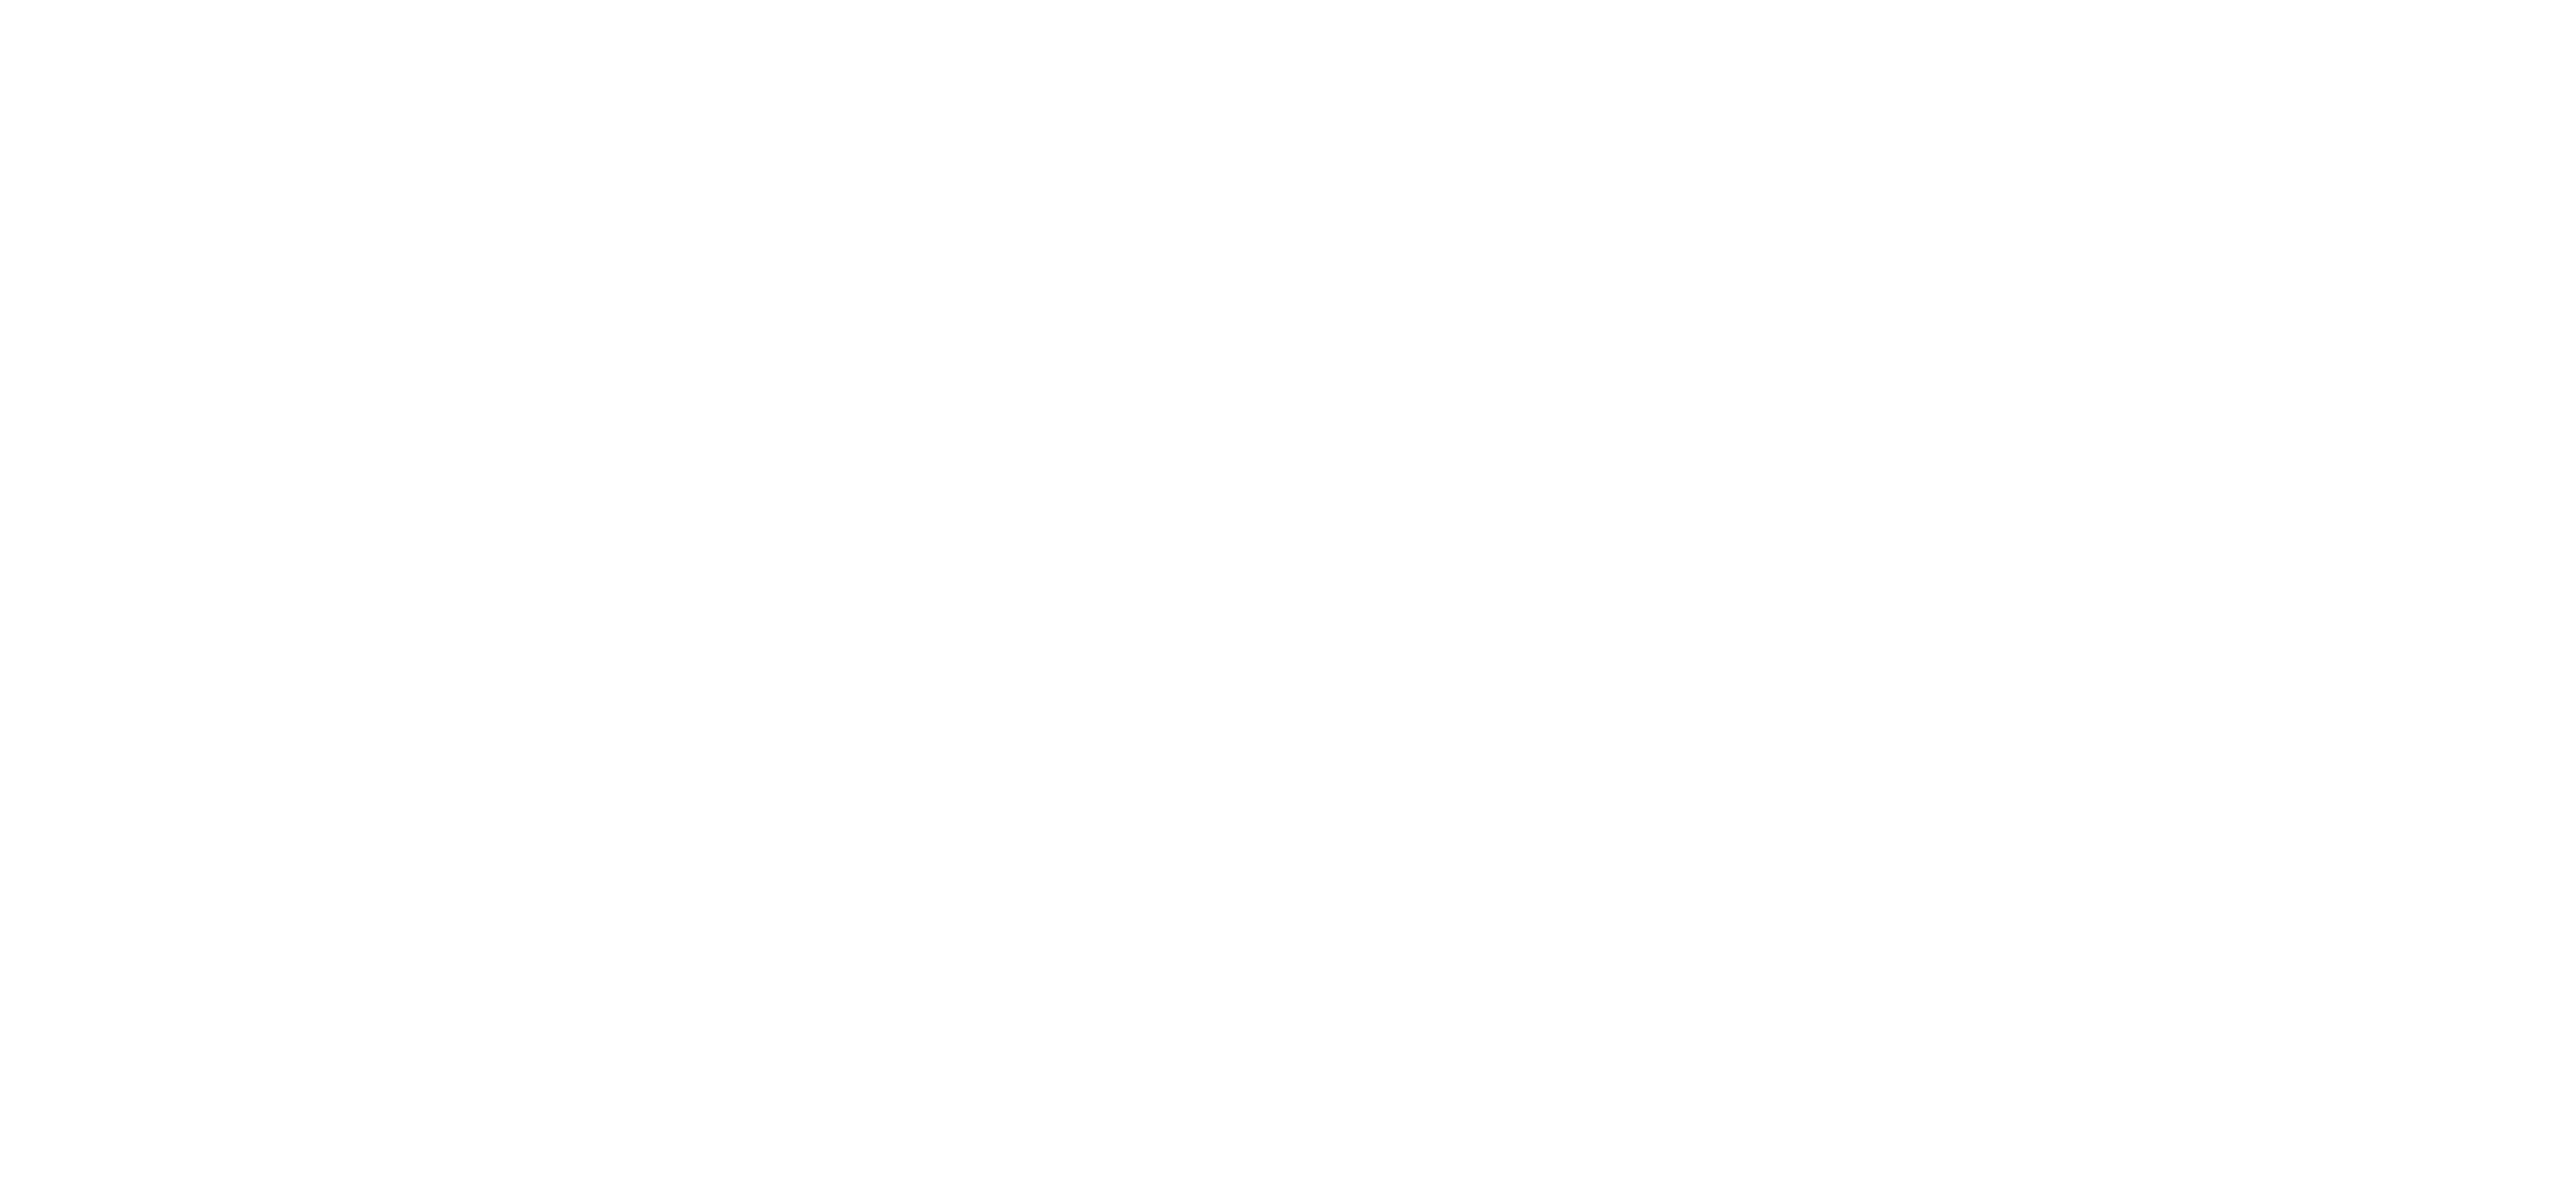 Solid construction services logo white